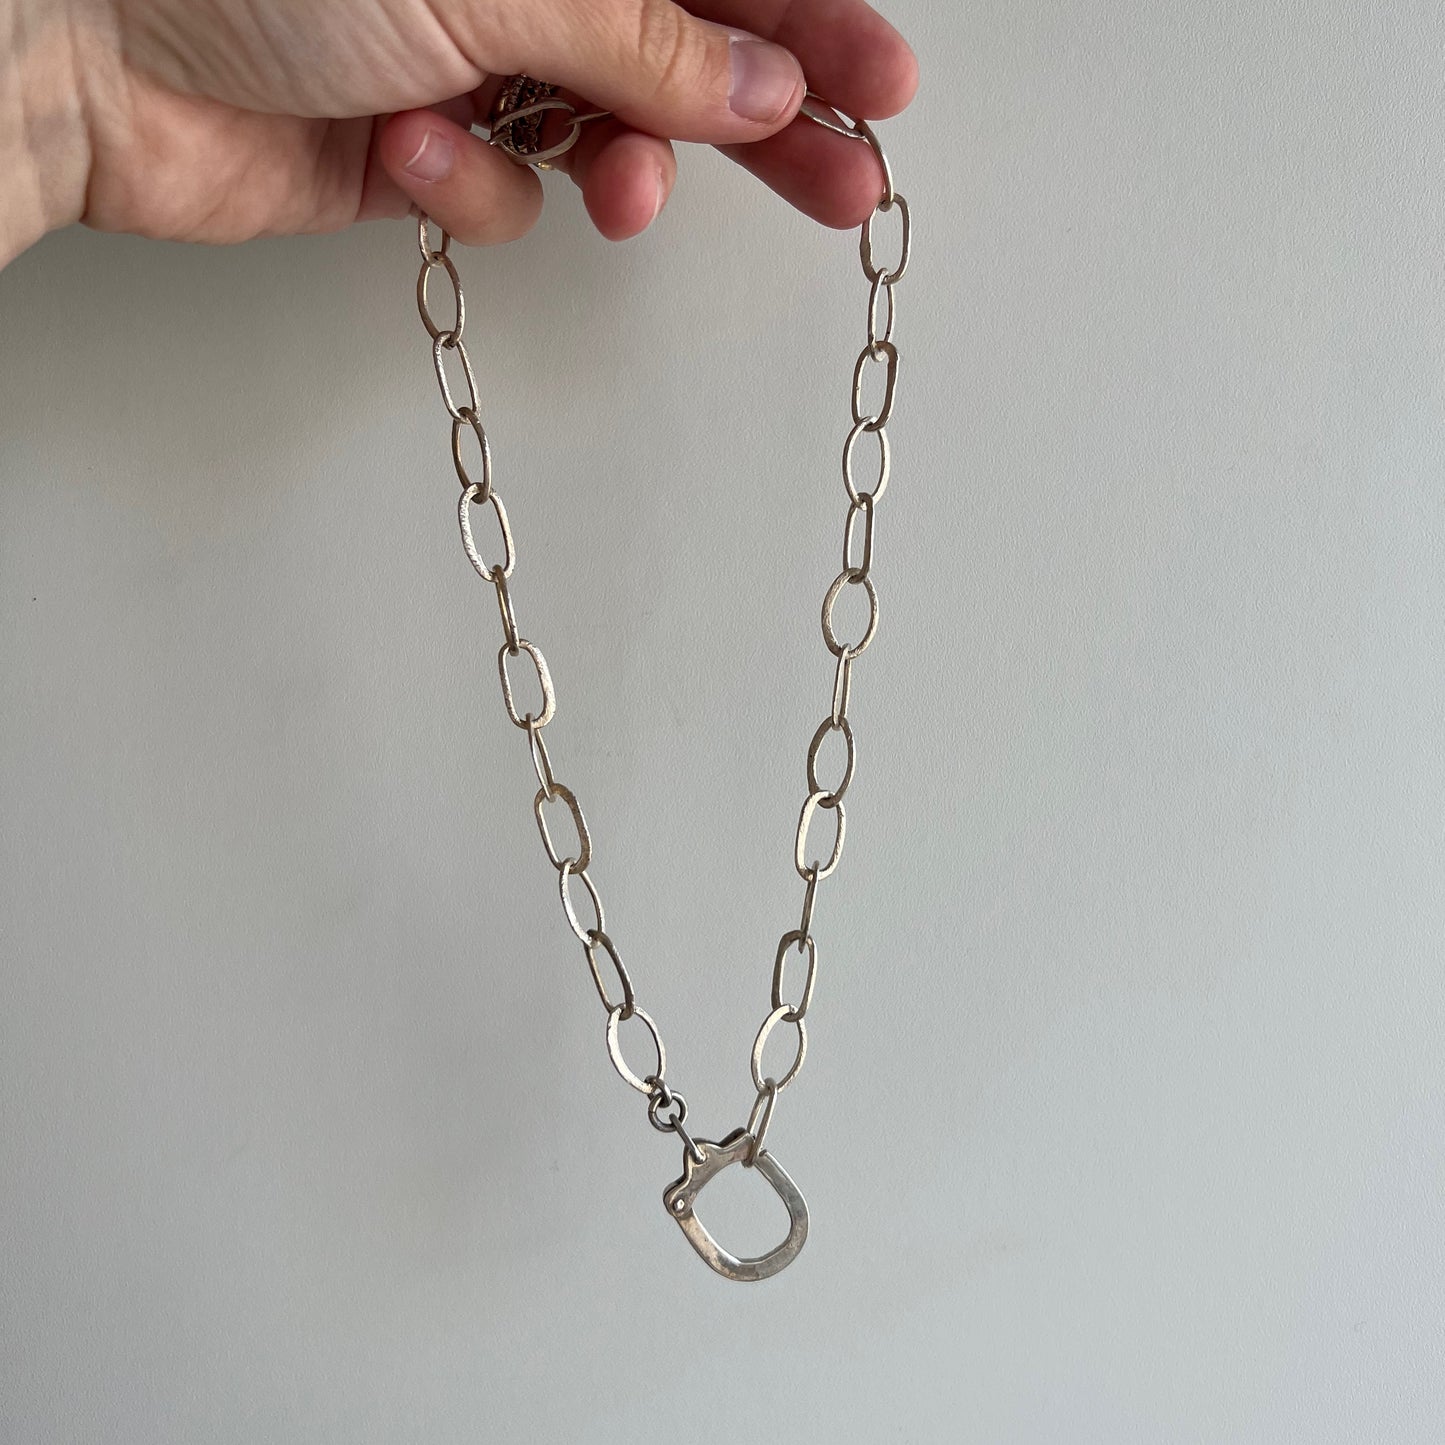 reimagined V I N T A G E // all linked up / sterling silver hammered brushed oval link chain with a connector clasp / 16"